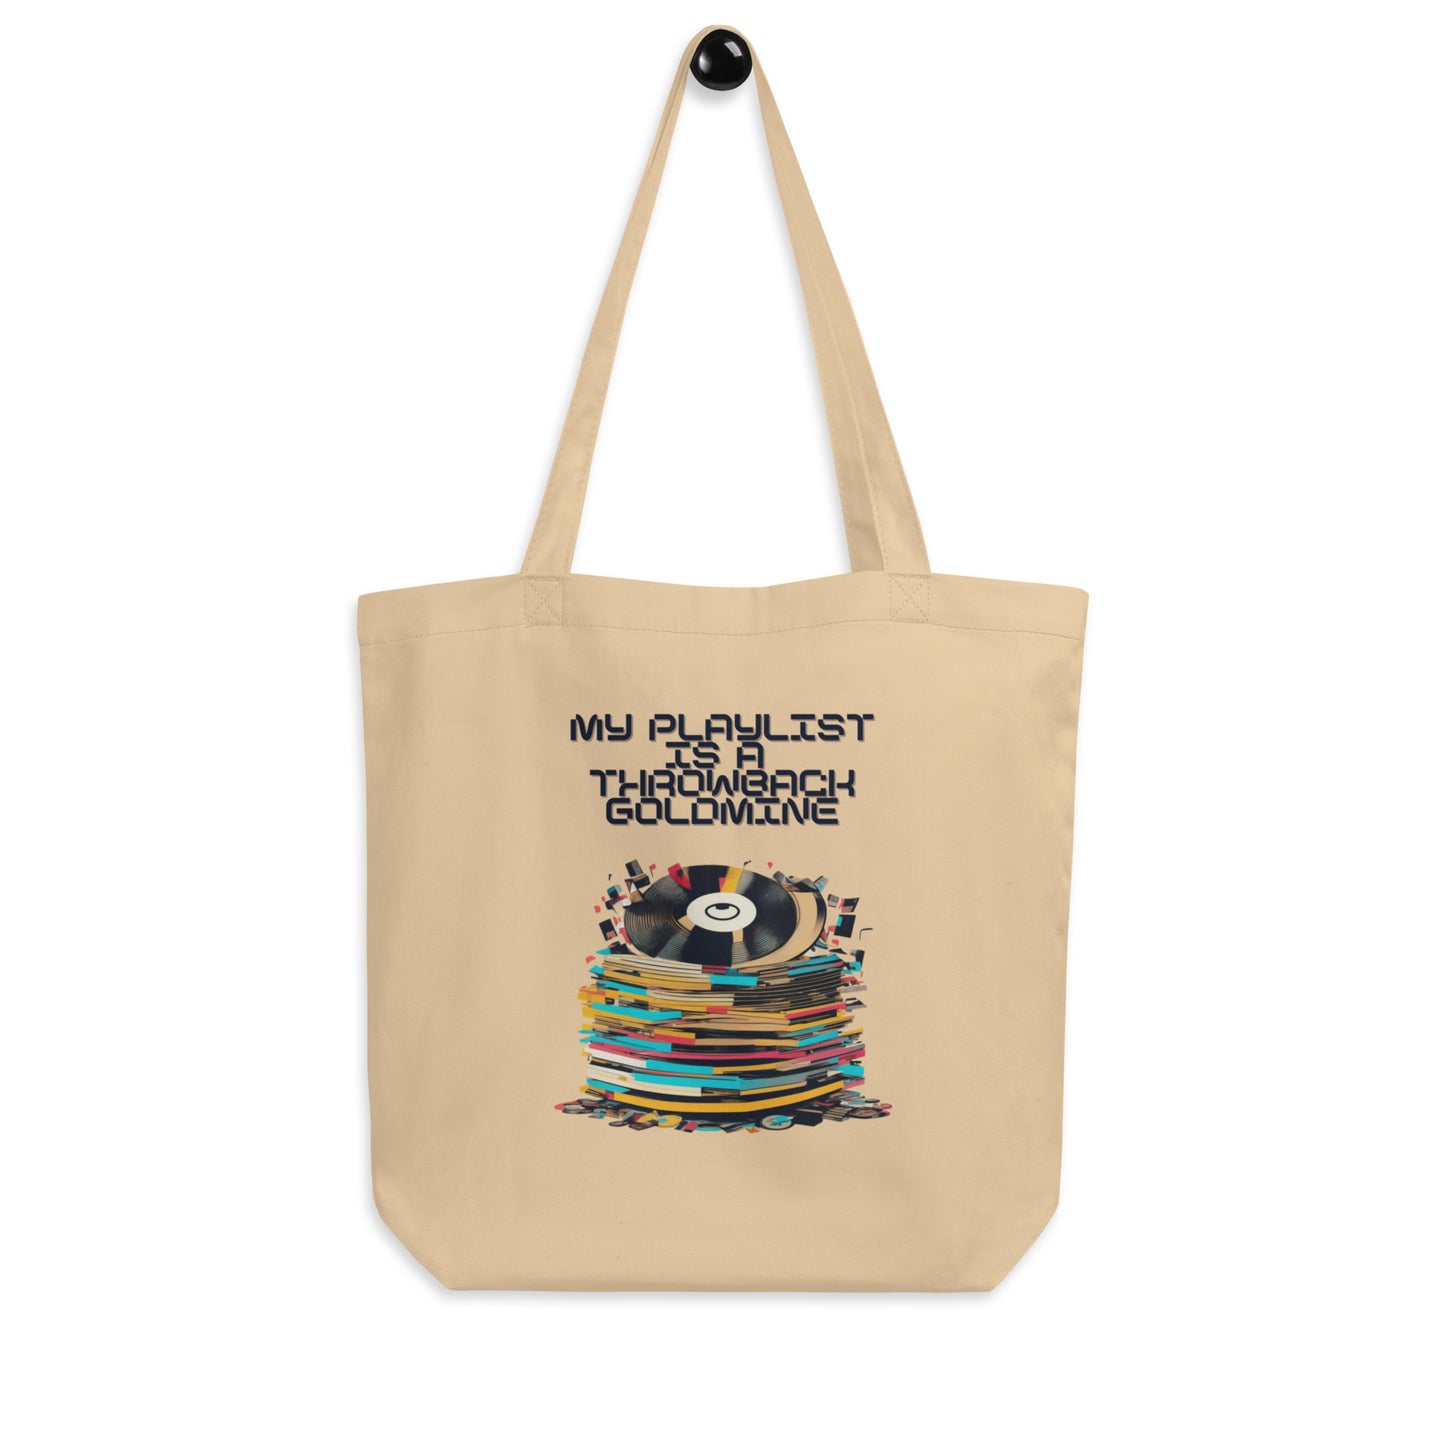 Vintage Tunes-Themed Tote Bag